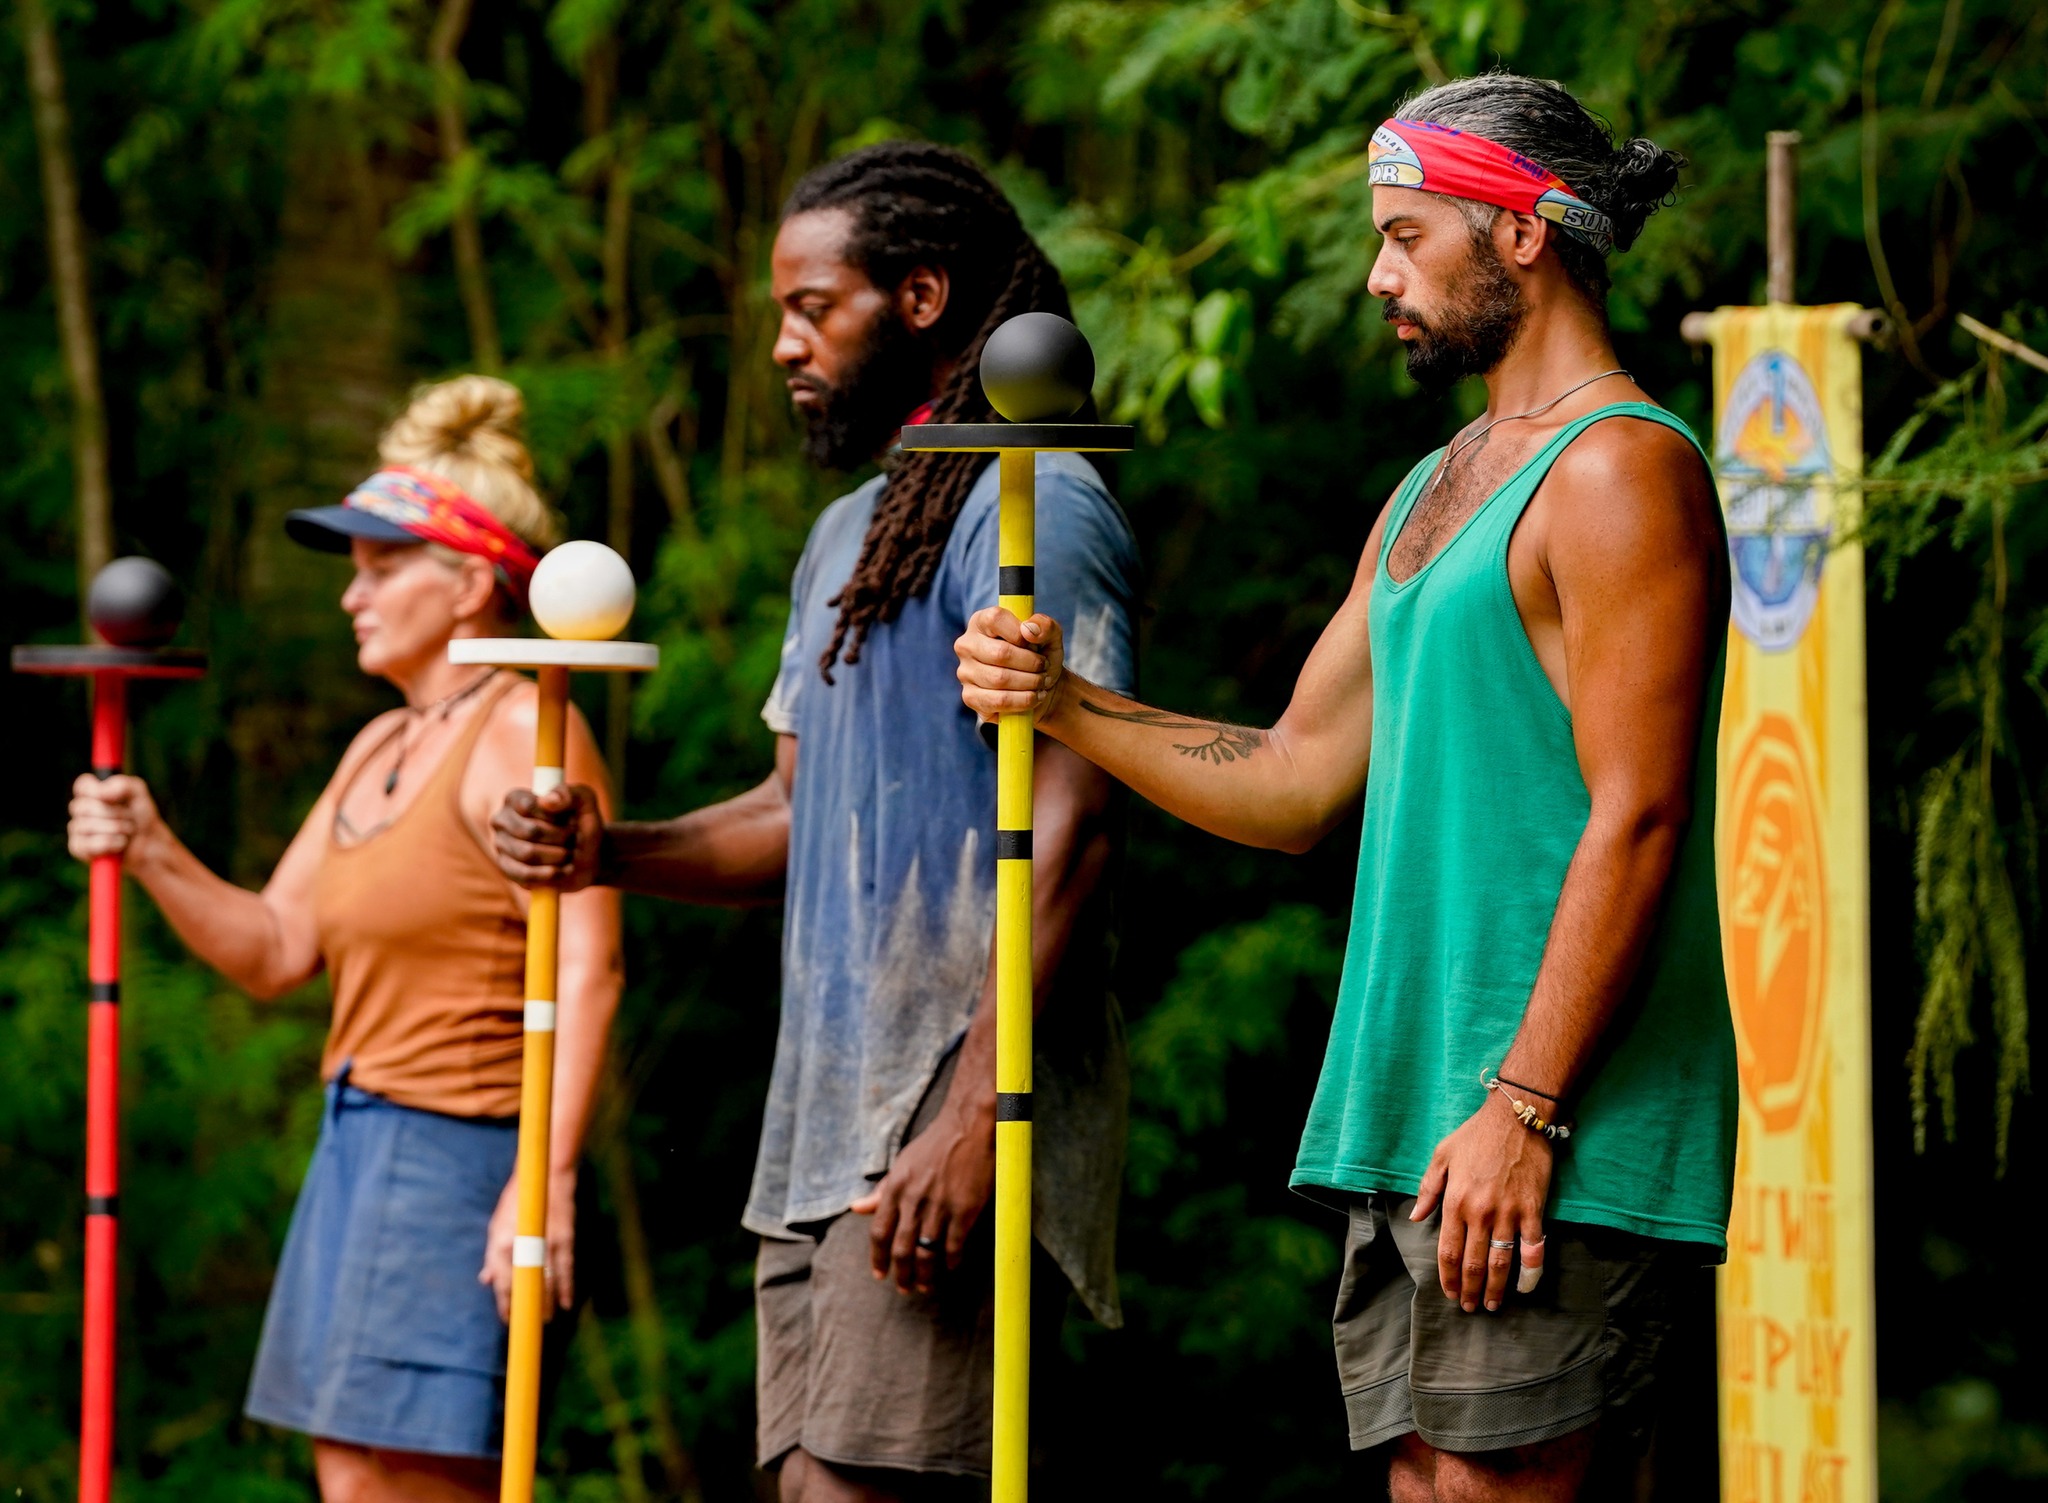 Heather, Danny, and Ricard competing on Survivor 41 immunity challenge